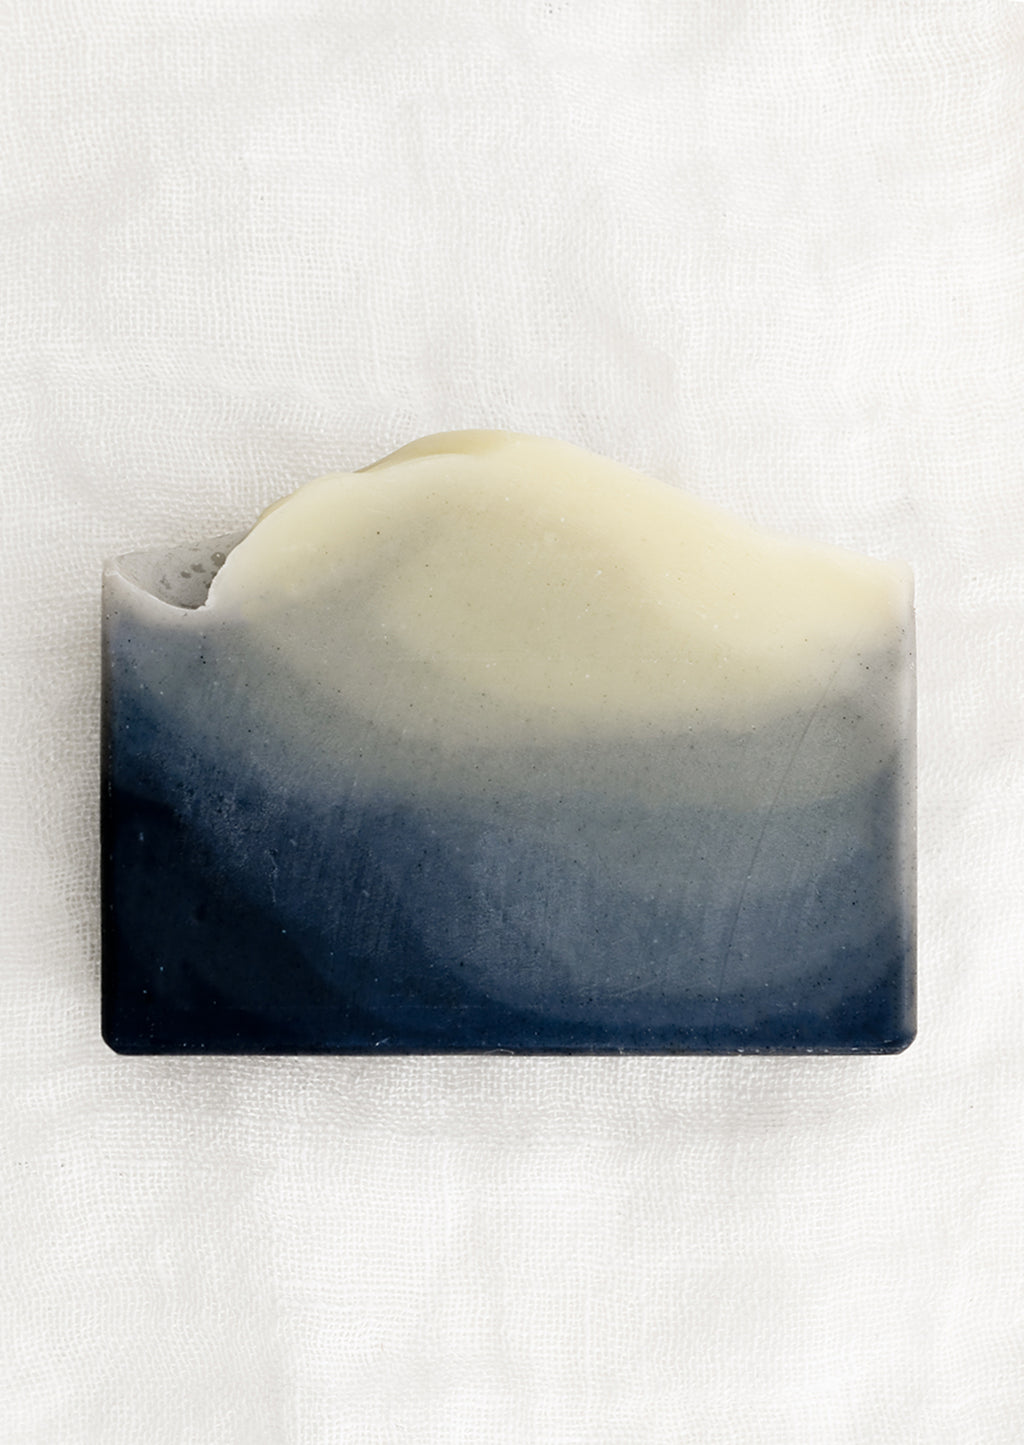 Indigo: A bar of soap in indigo style (layered charcoal pattern).